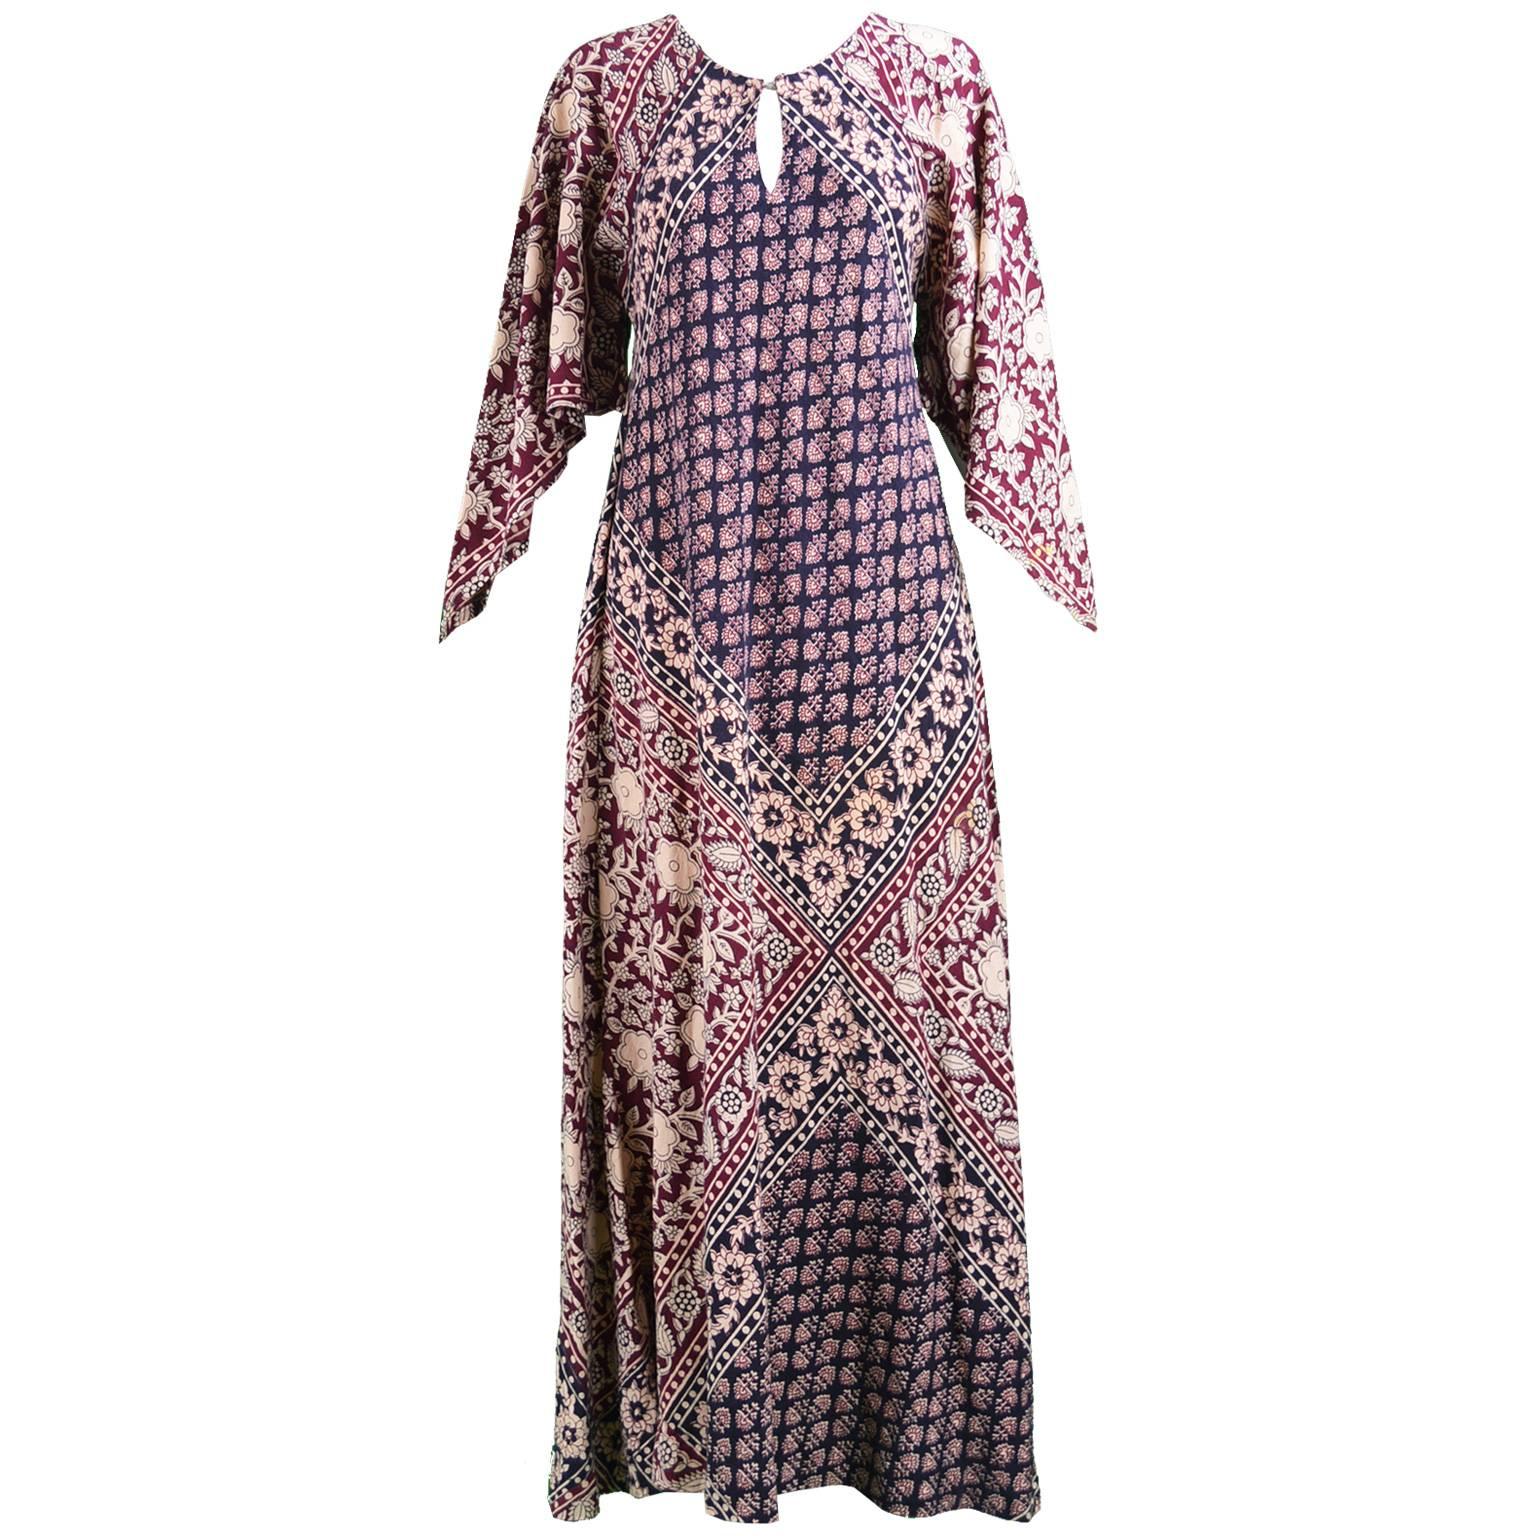 Vintage 1970s Indian Cotton Maxi Kaftan Dress with Pointed Angel Sleeves